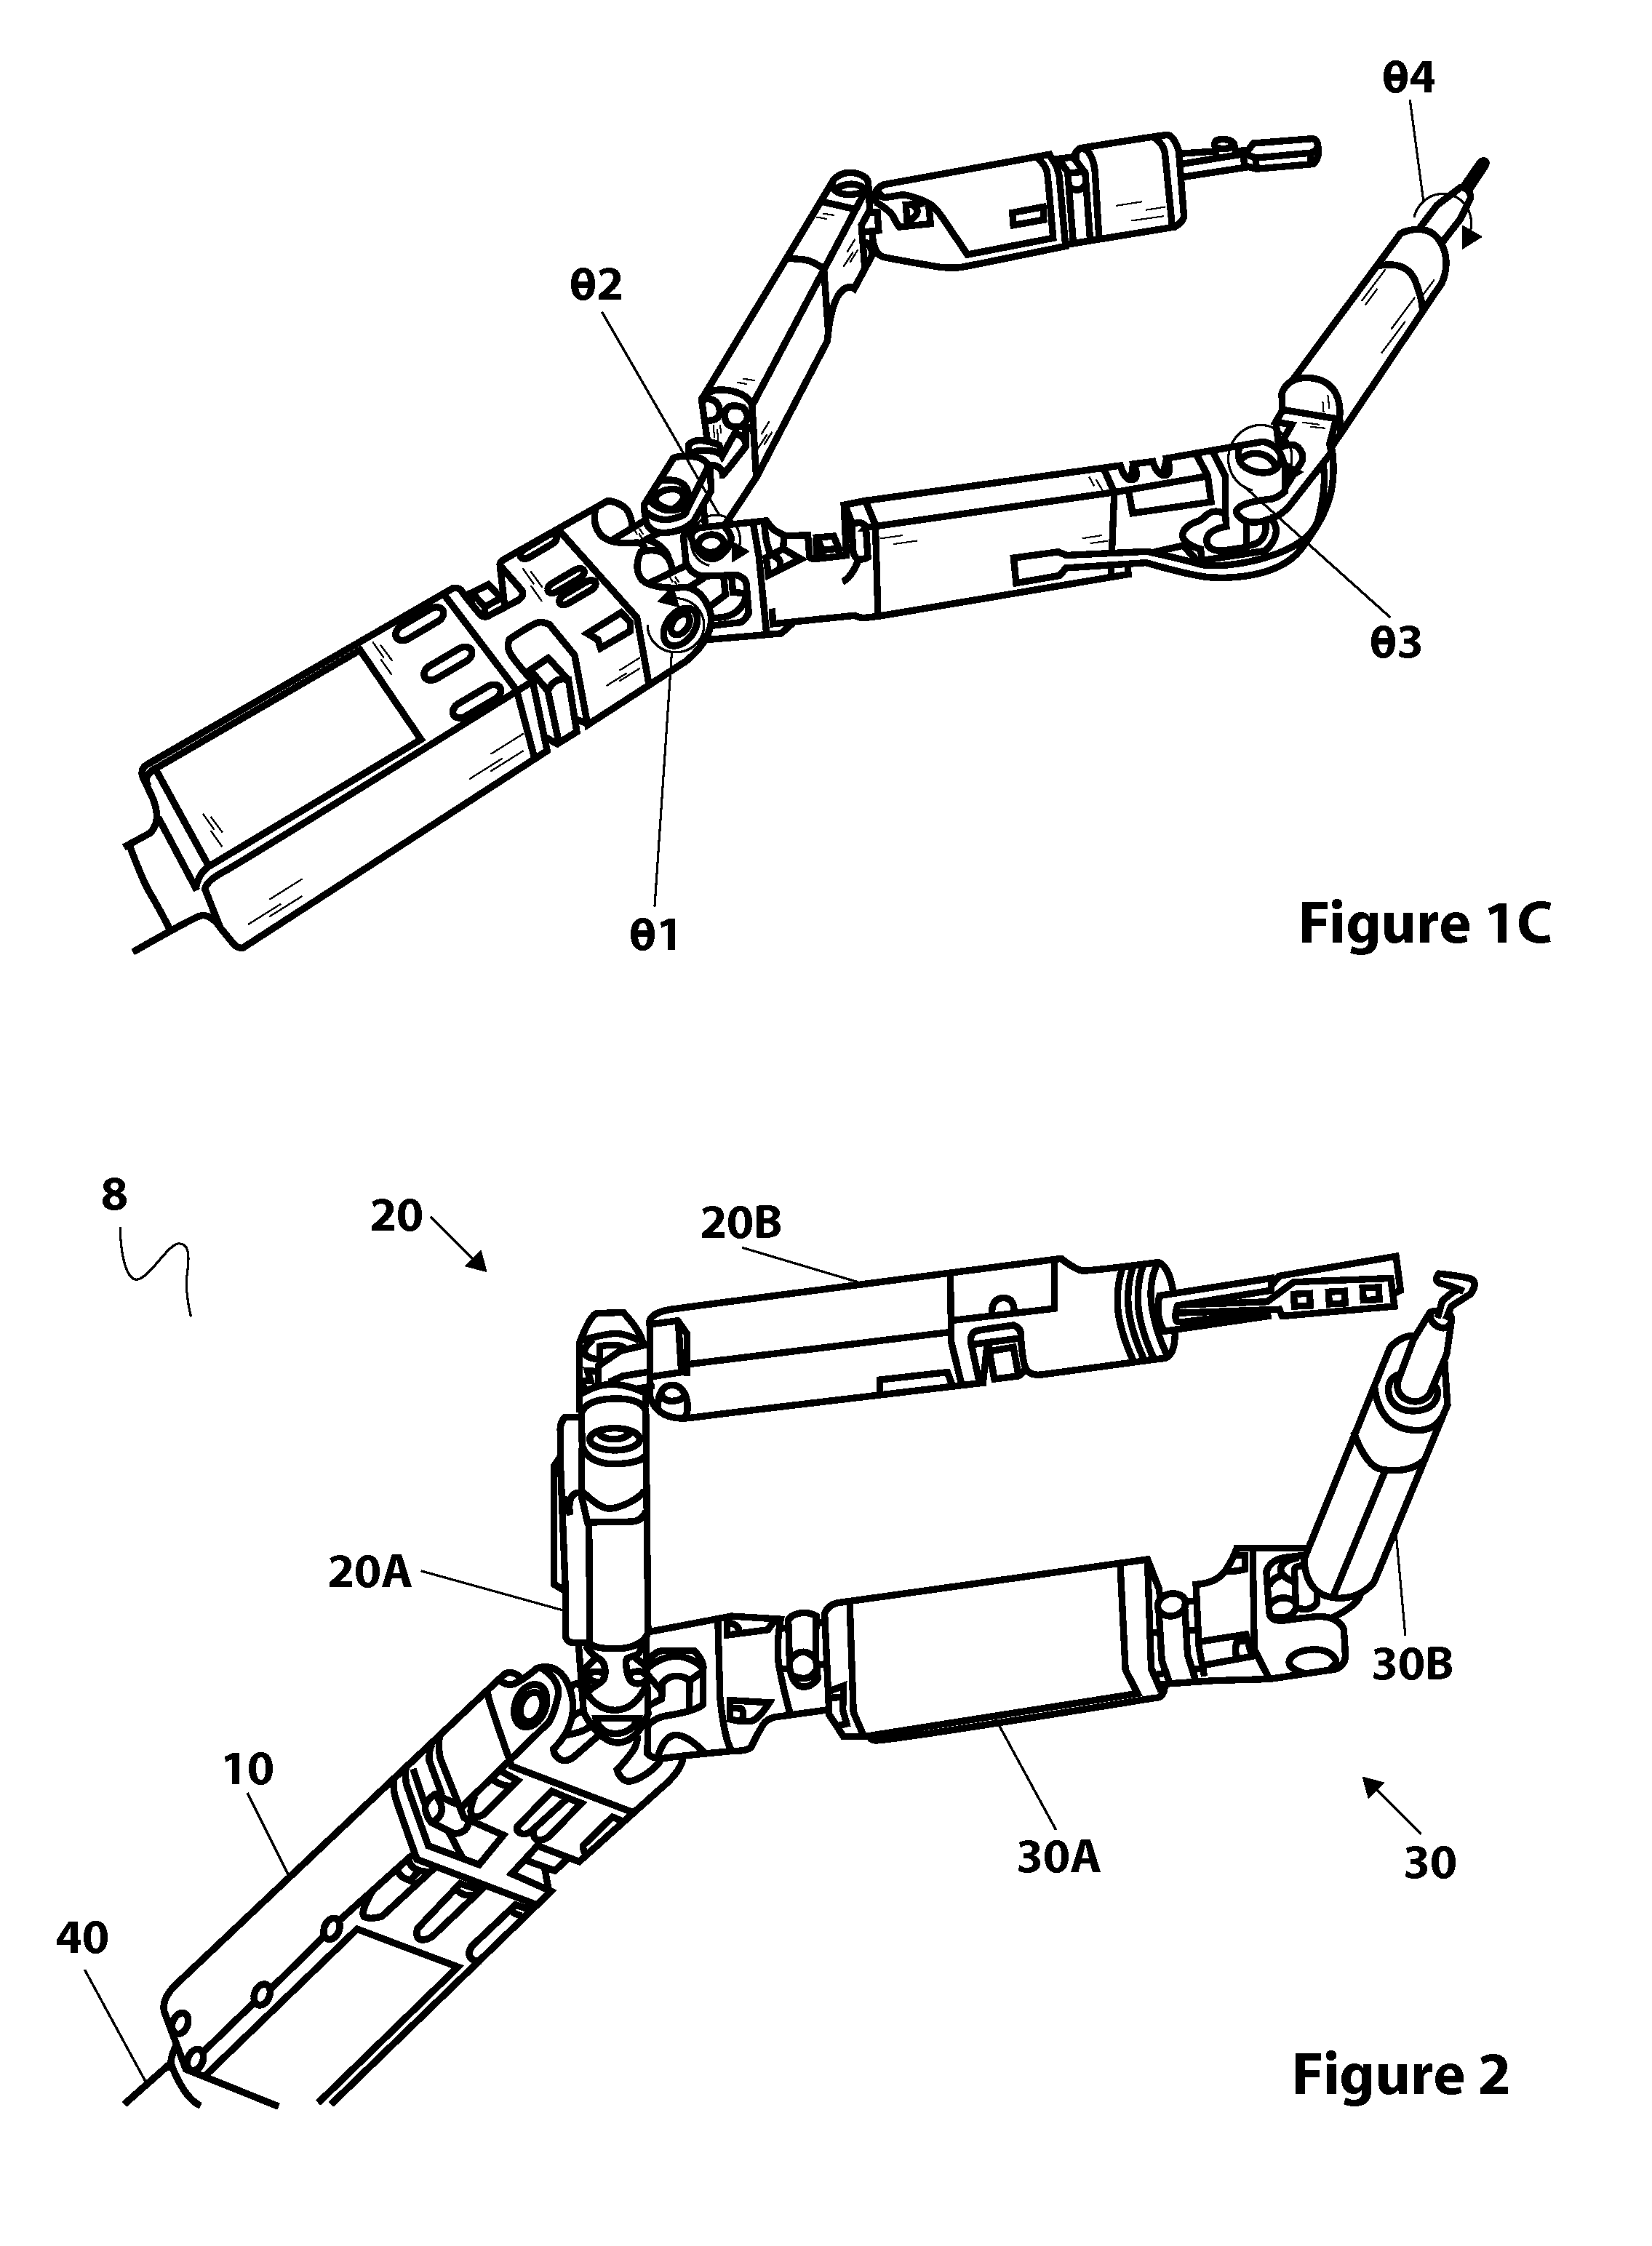 Local Control Robotic Surgical Devices and Related Methods